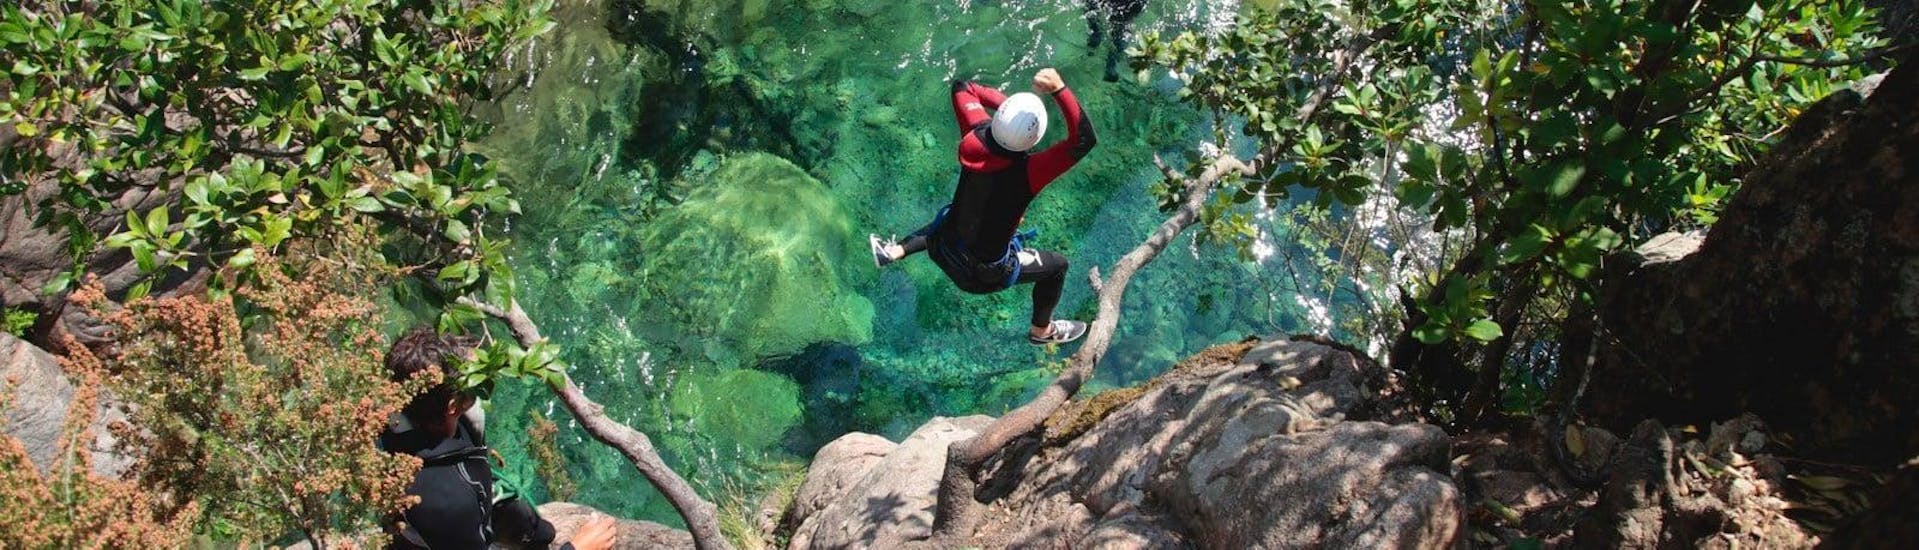 A canyoning enthusiast is jumping into an emerald green natural pool under the supervision of a qualified canyoning guide from Acqua et Natura which offers canyoning trips in Corsica.